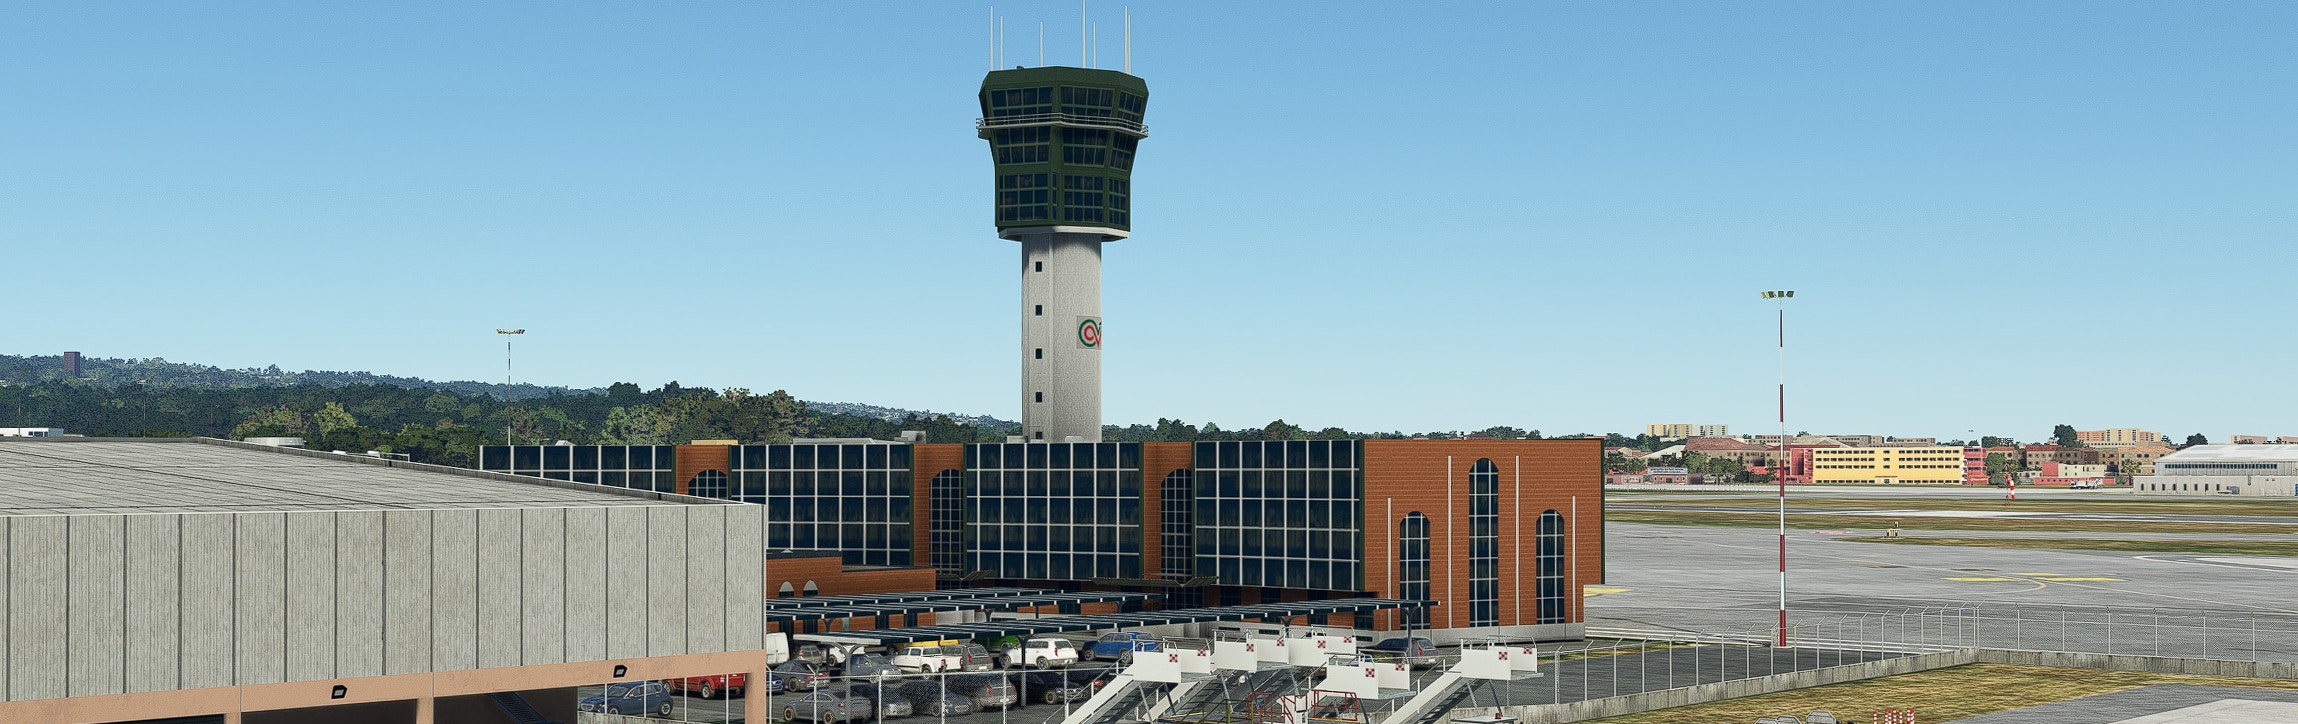 RDPresets Releases Naples Airport